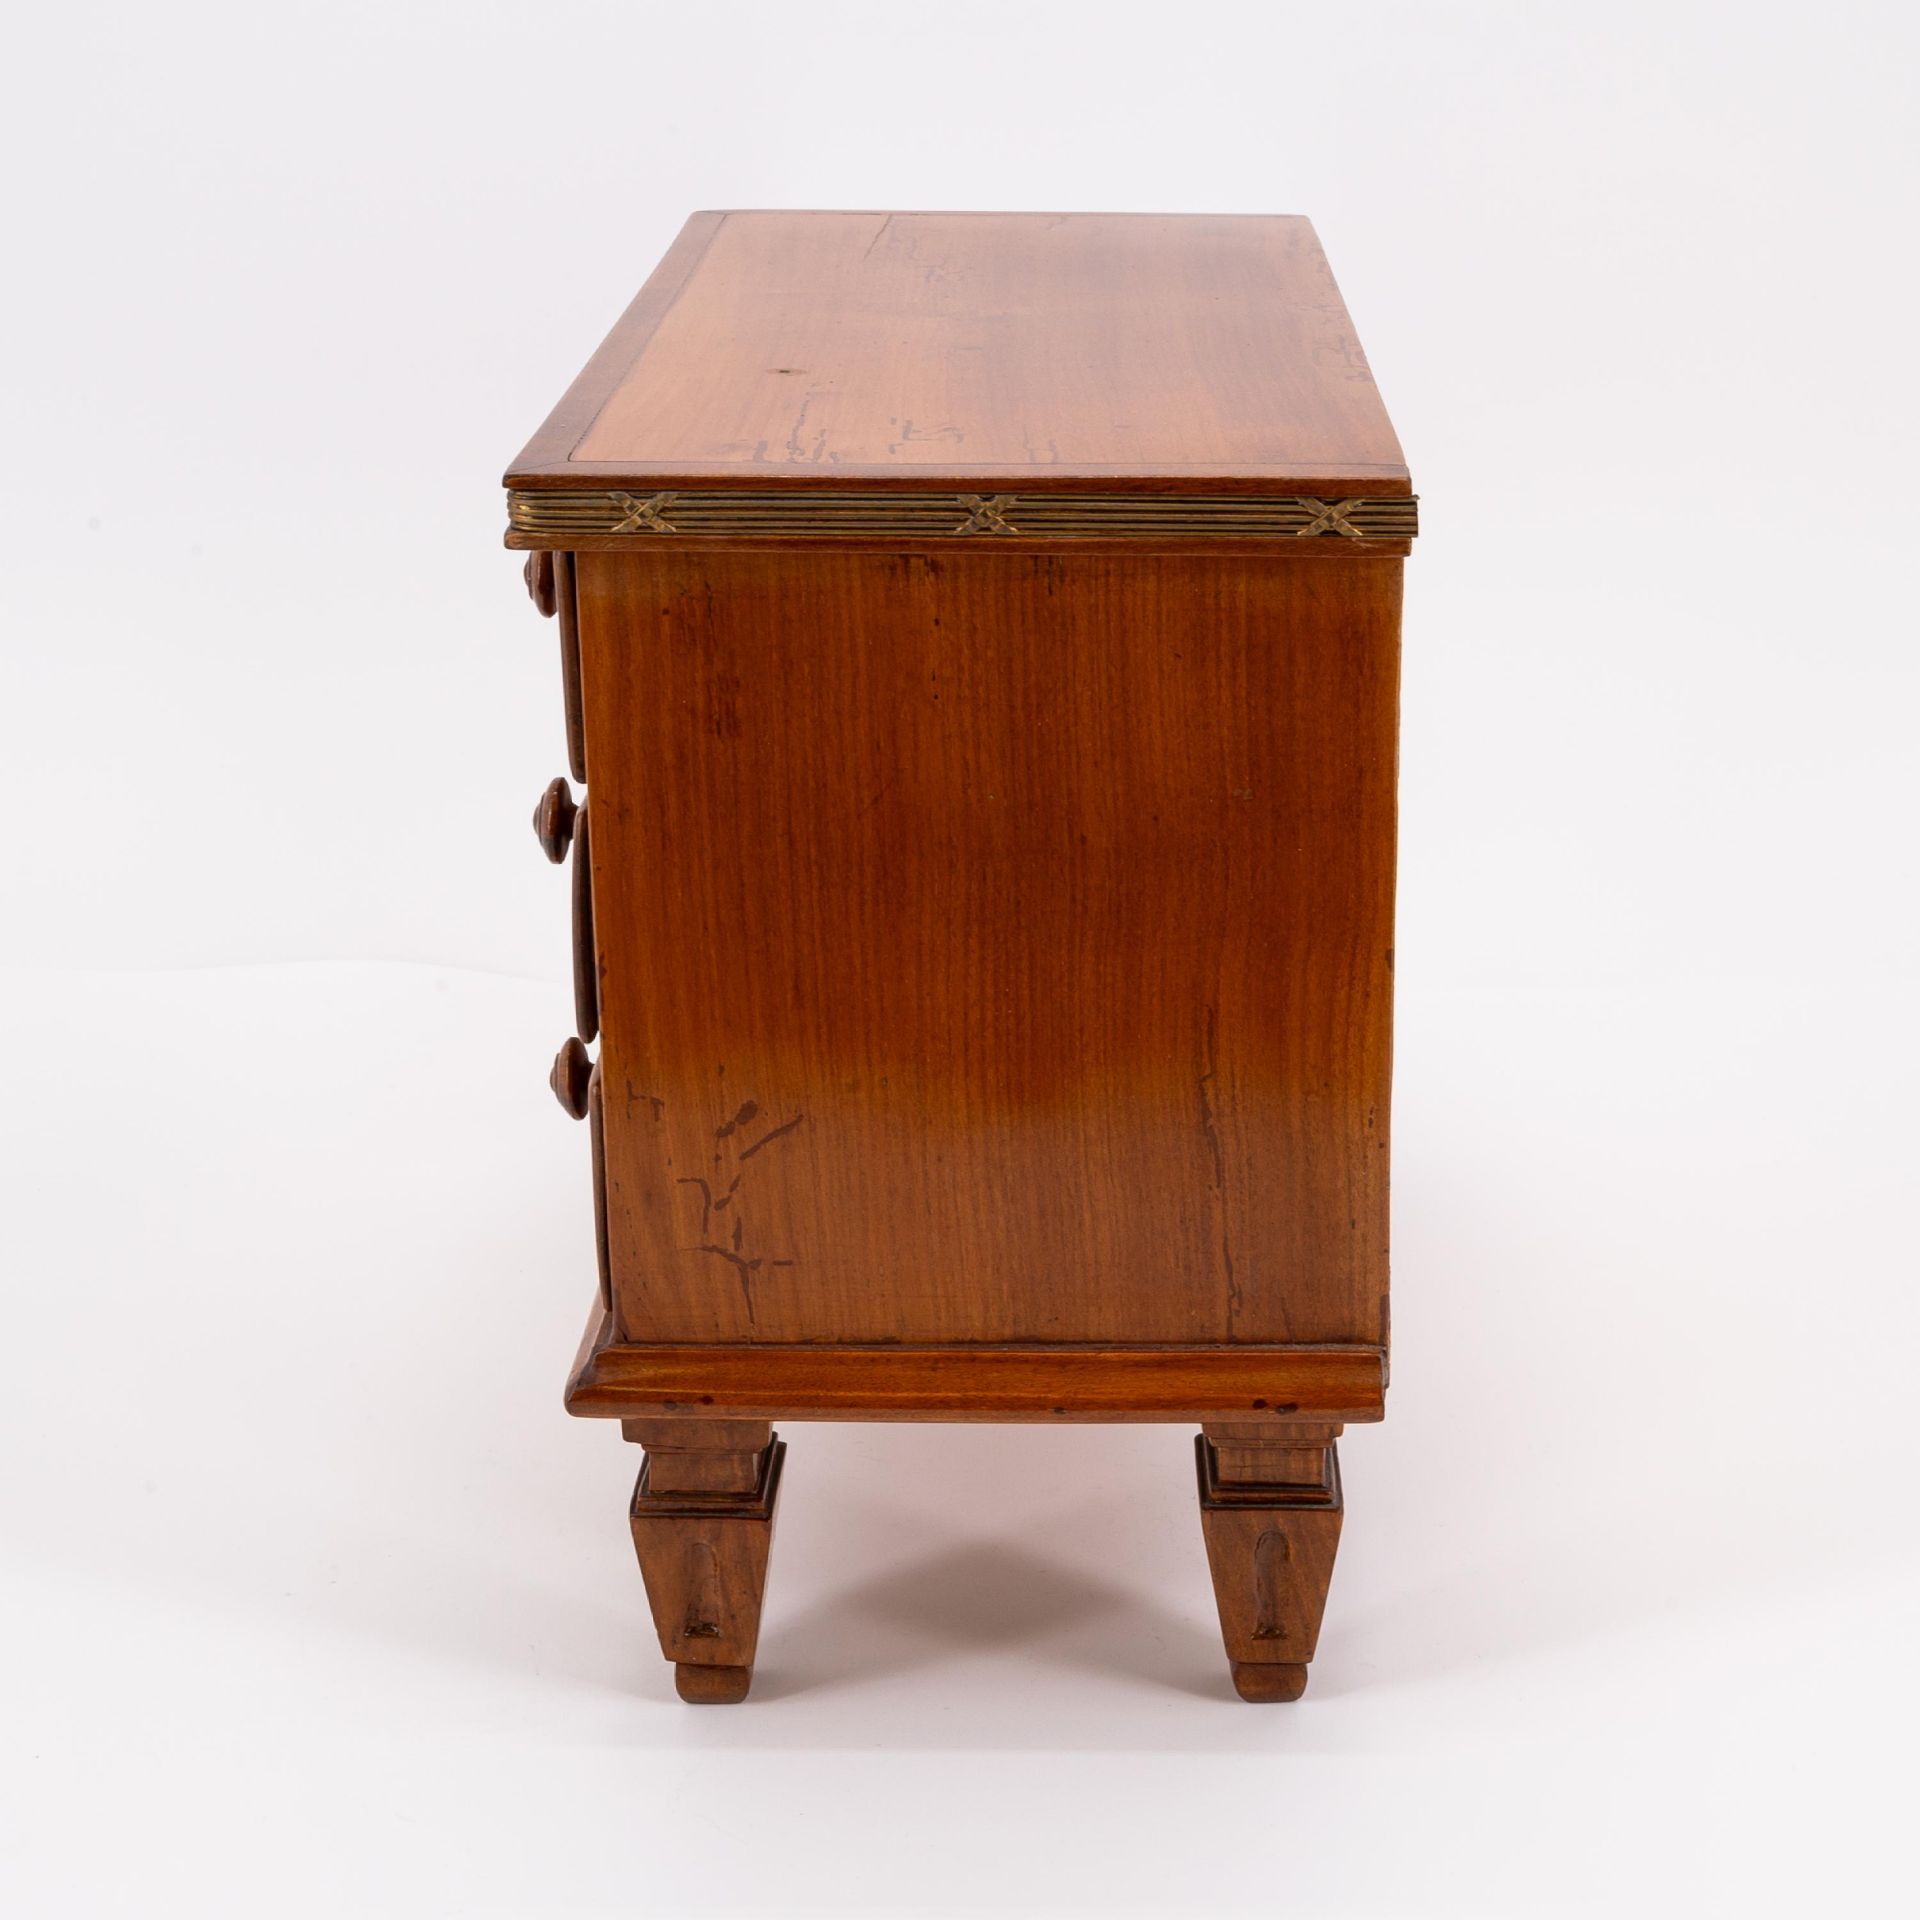 Germany: MINIATURE WOODEN BIEDERMEIER CHEST OF DRAWERS - Image 3 of 7